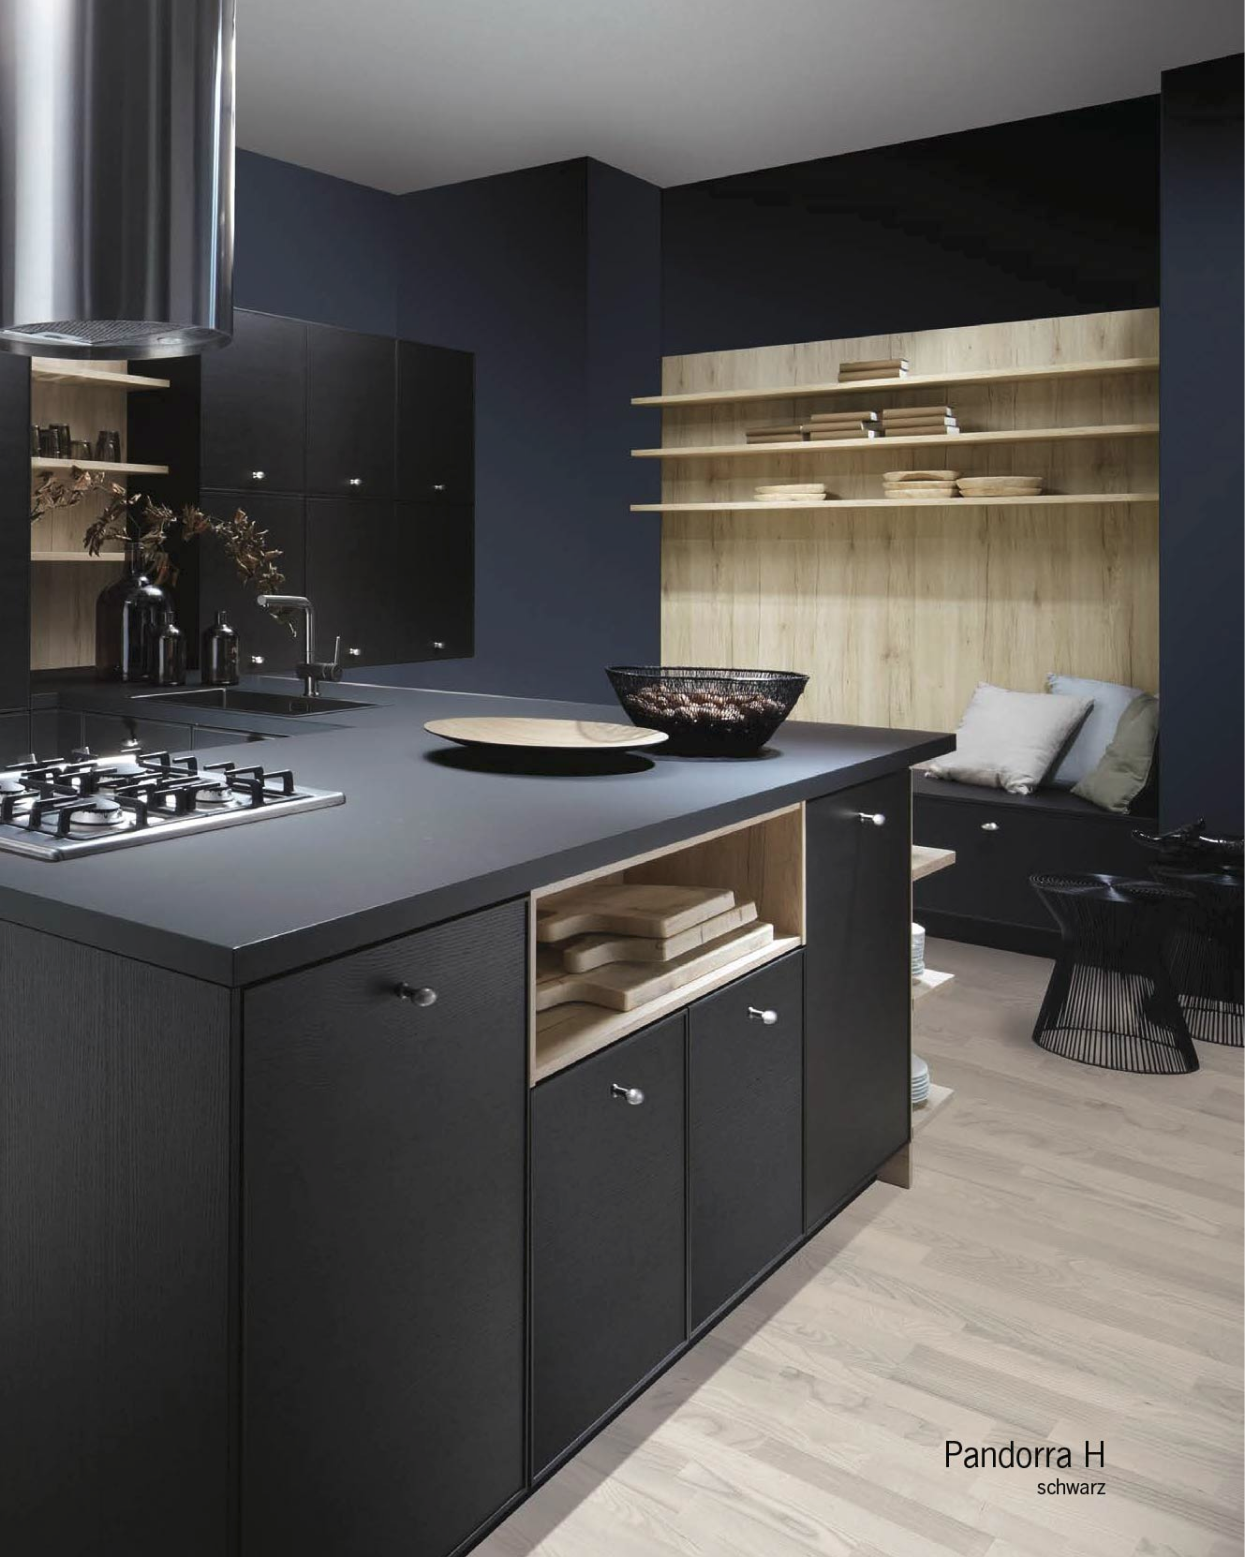 unique kitchen design with wood style and space grey color with big island in the middle